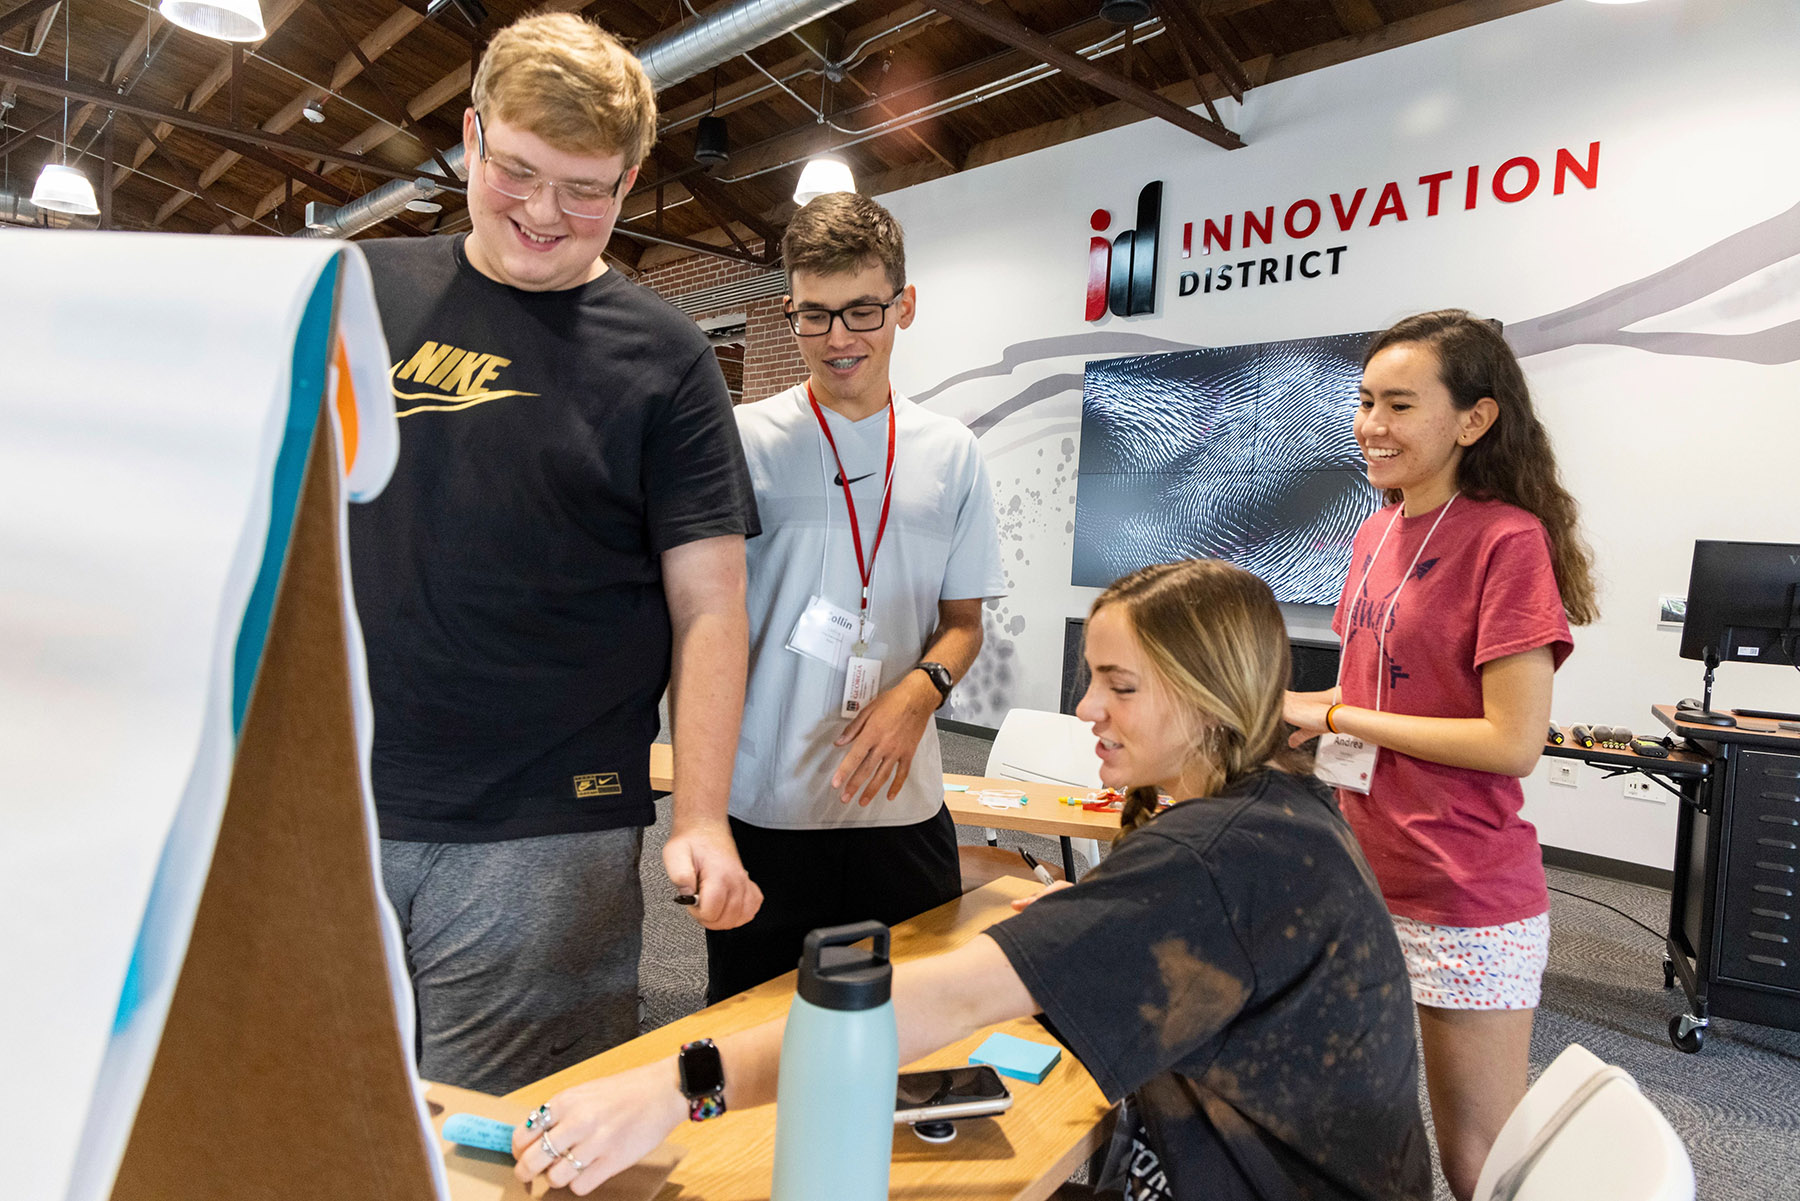 Students at Innovation District